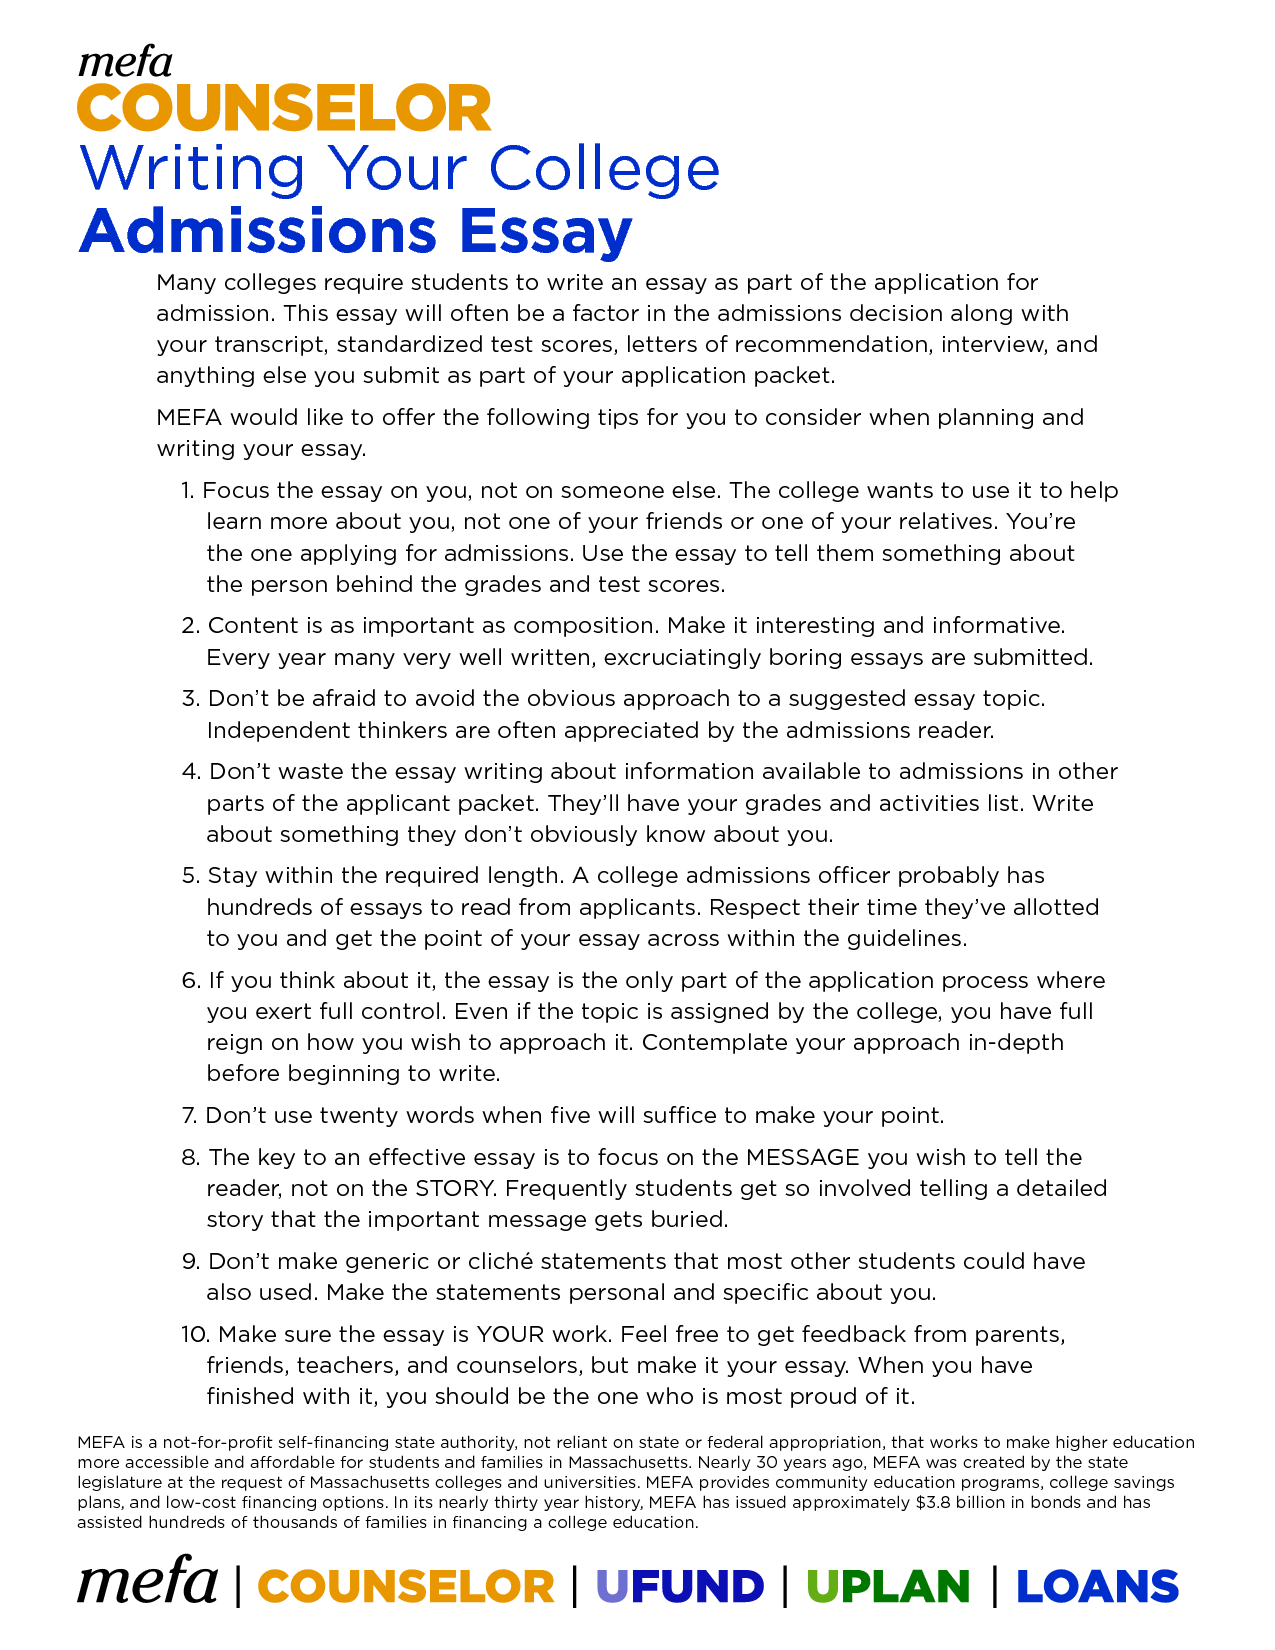 What Are You Most Proud Of Essay - Multi Paragraph Essay Help How To ...